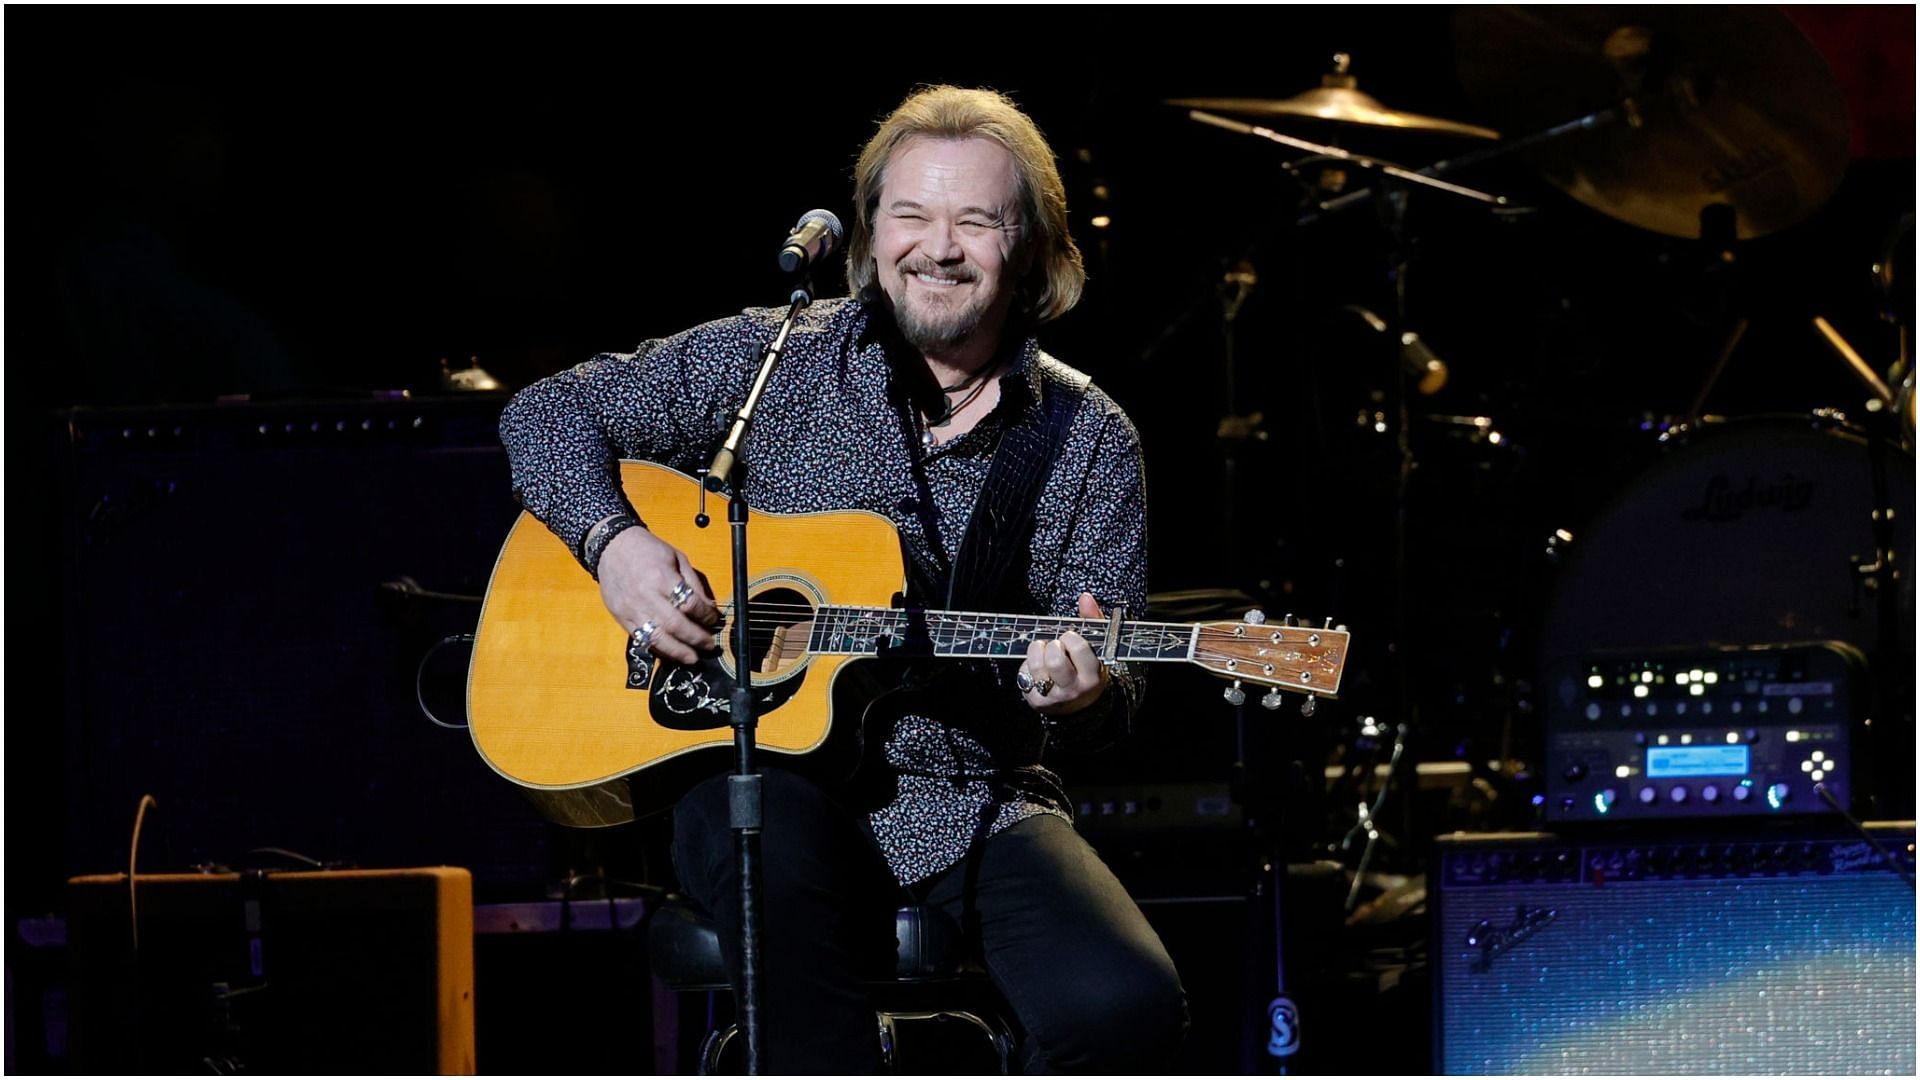 Travis Tritt performs during the Volunteer Jam: A Musical Salute To Charlie Daniels at Bridgestone Arena on August 18, 2021, in Nashville, Tennessee (Image via Getty Images)